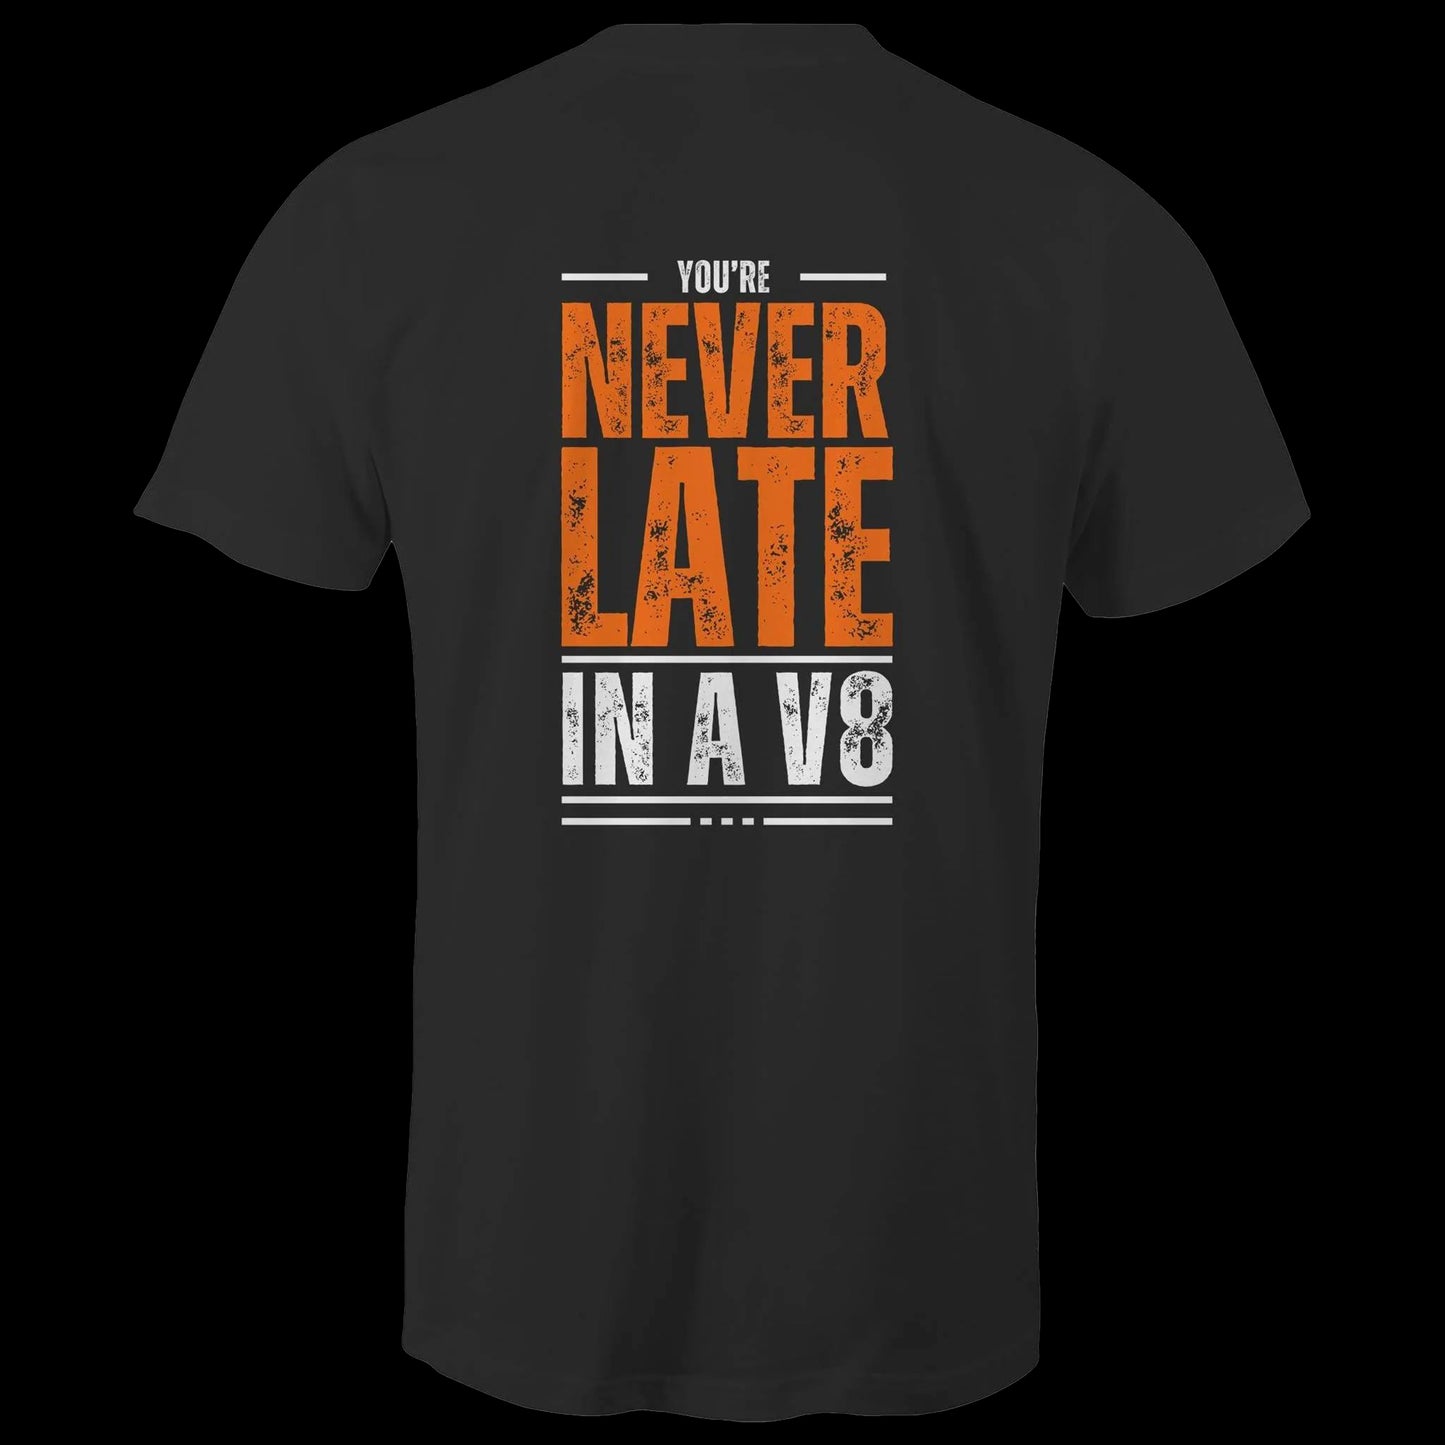 NEVER LATE IN A V8 T-SHIRT